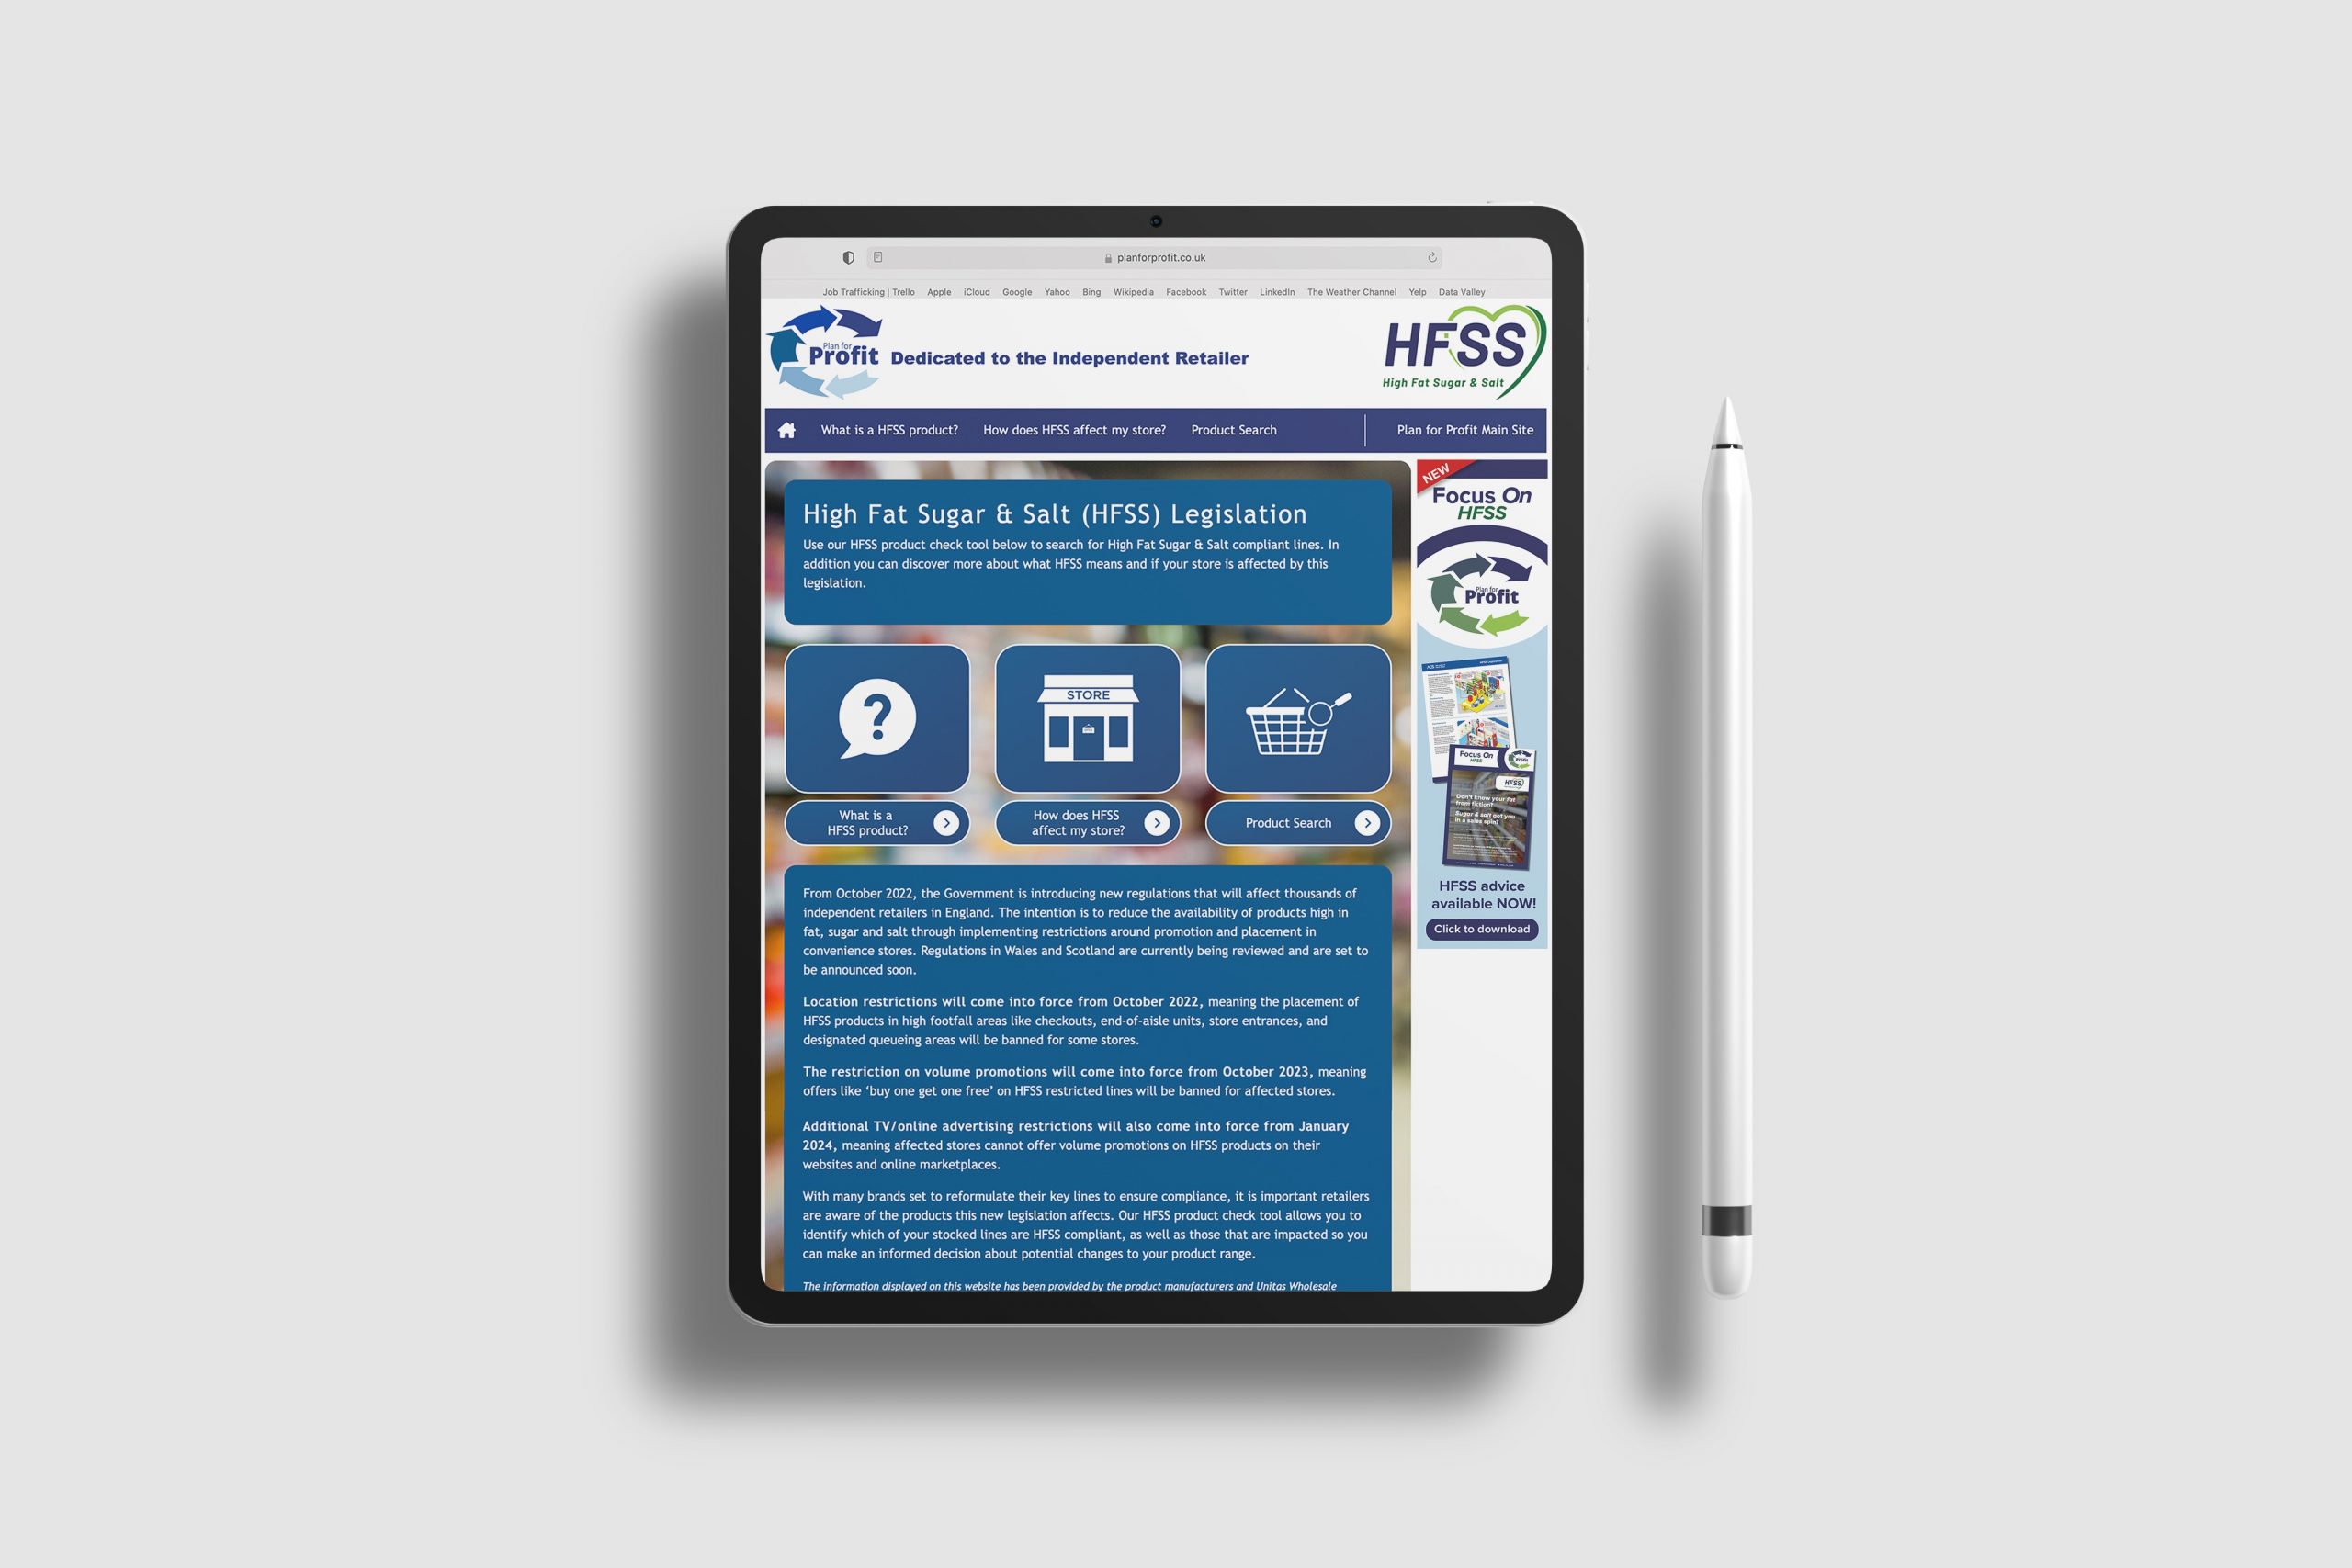 Plan for Profit to launch new HFSS product-check tool